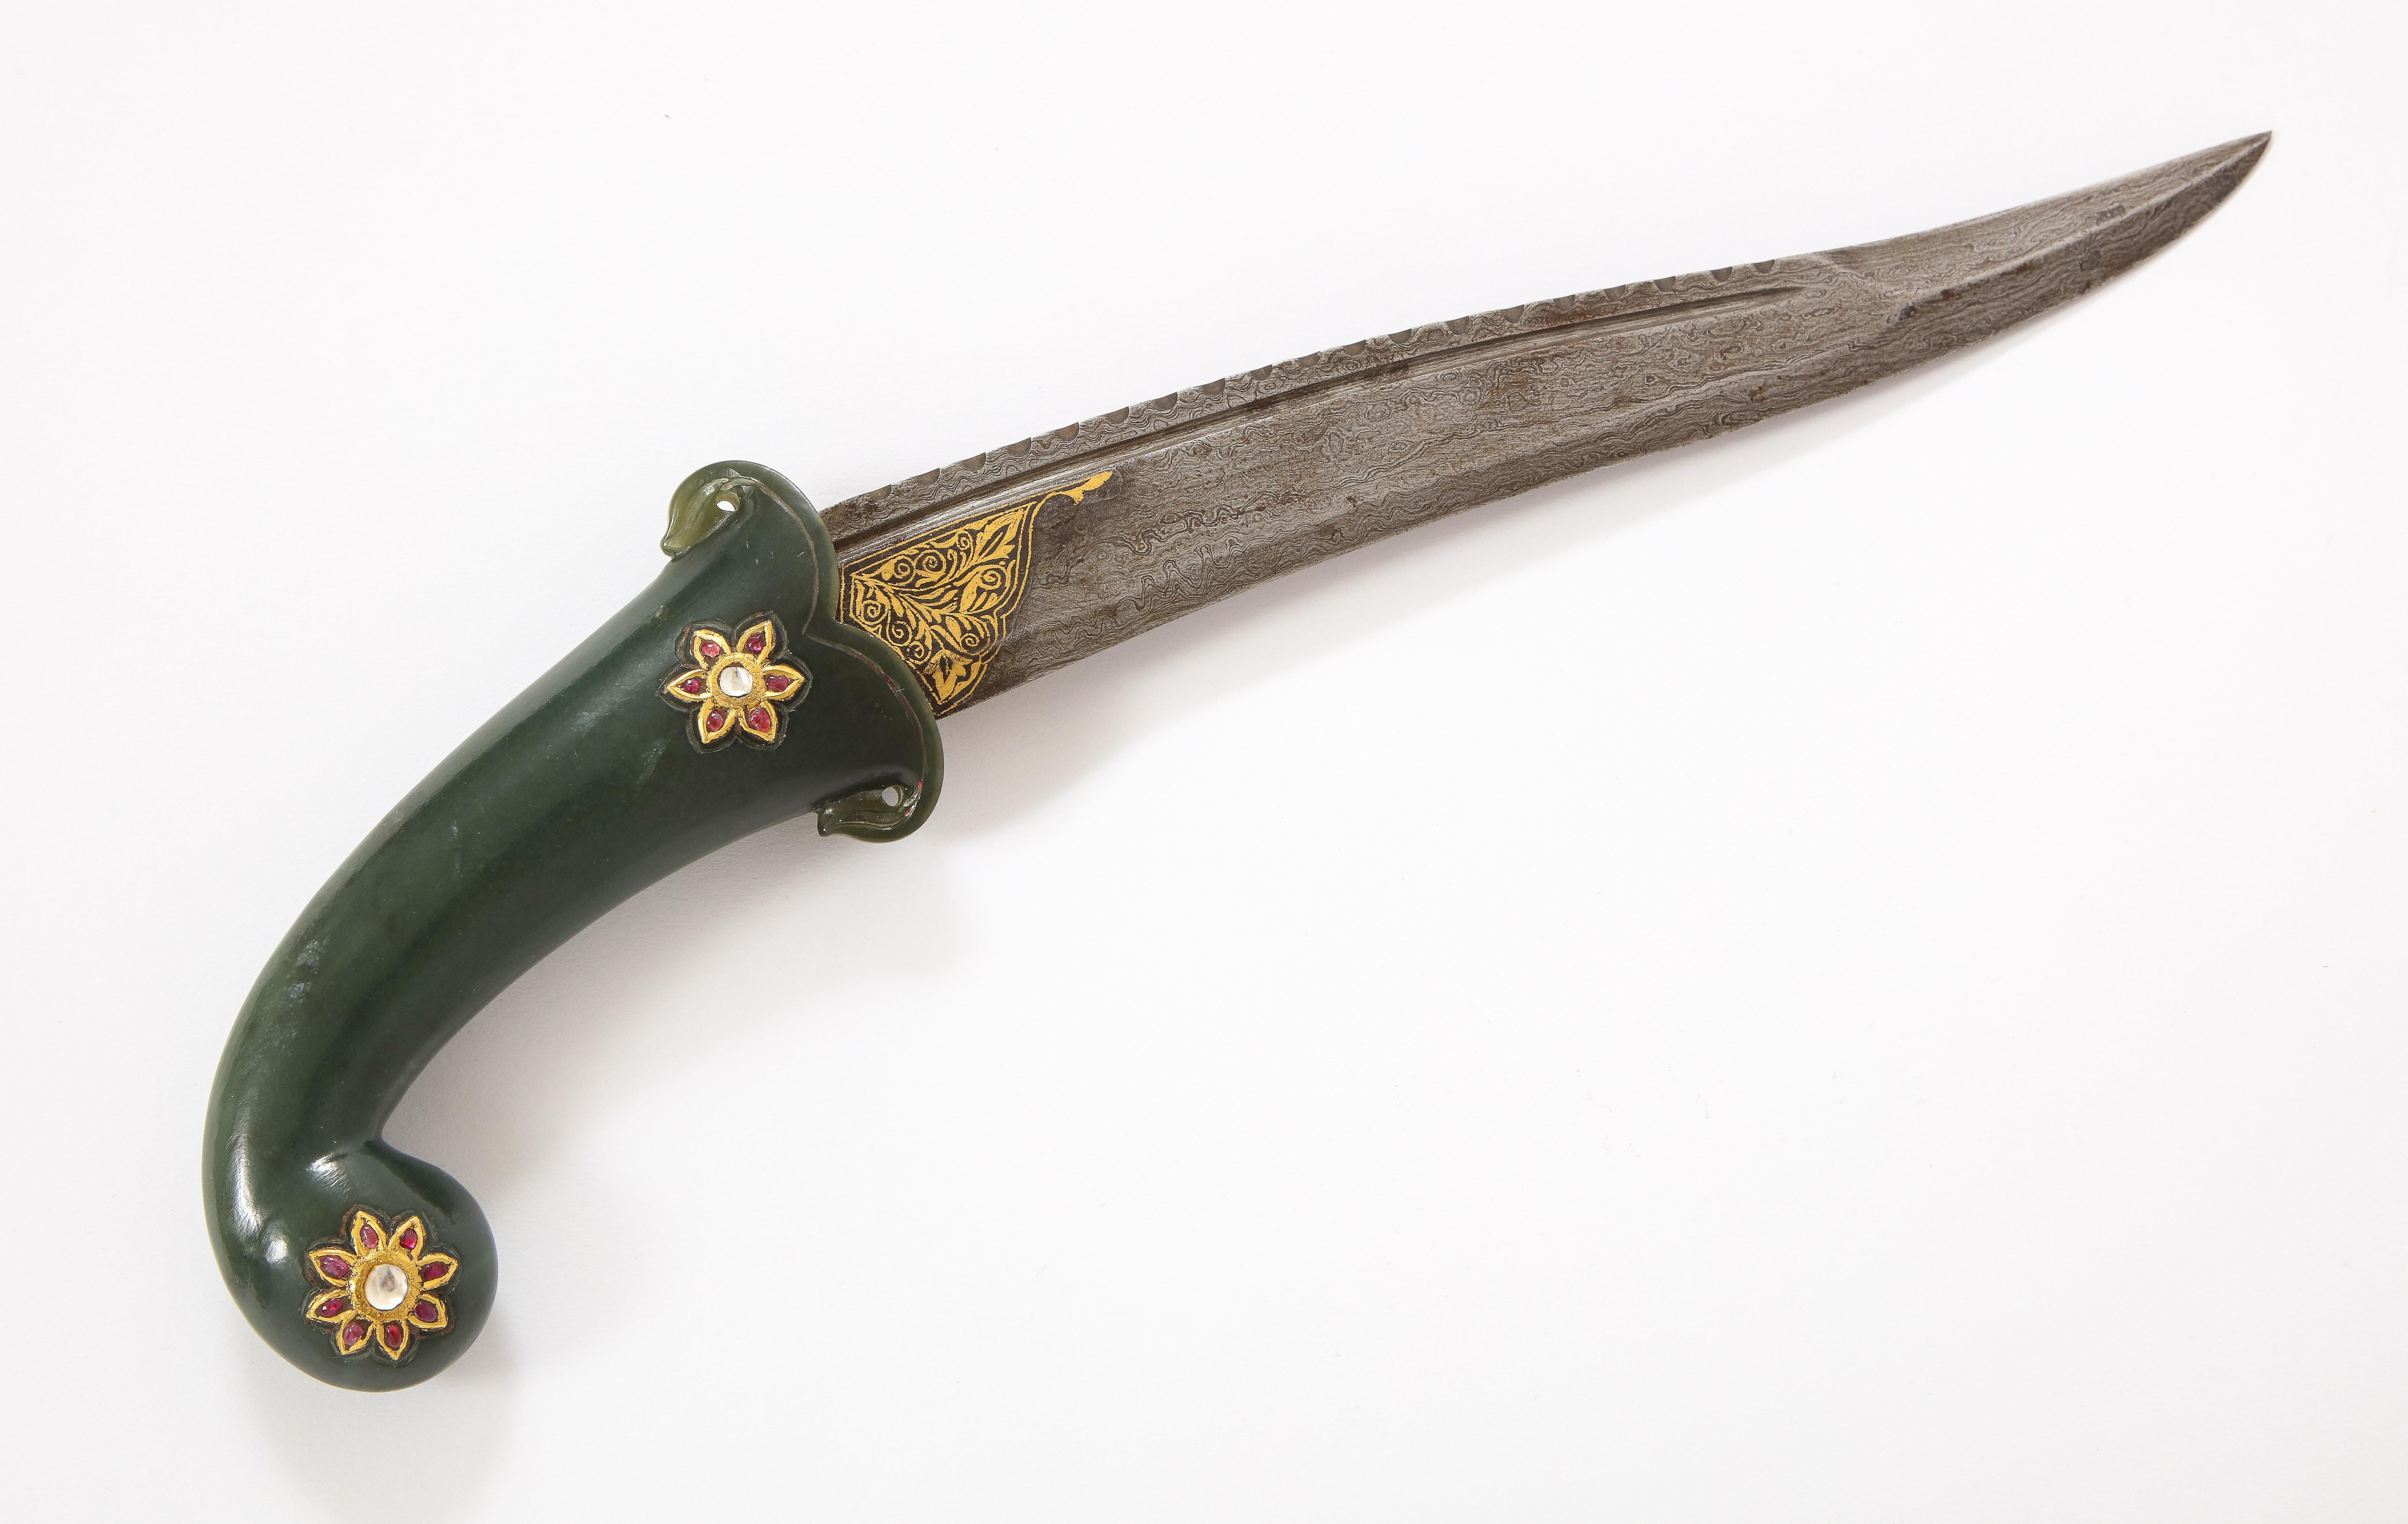 Mughal dynasty gold and gem encrusted Spinach jade dagger having a dark green pistol grip, inlaid with gold, ruby and sapphire applied rosettes to either side. The Damascus single edge blade with serrated back, and gold inlaid design at